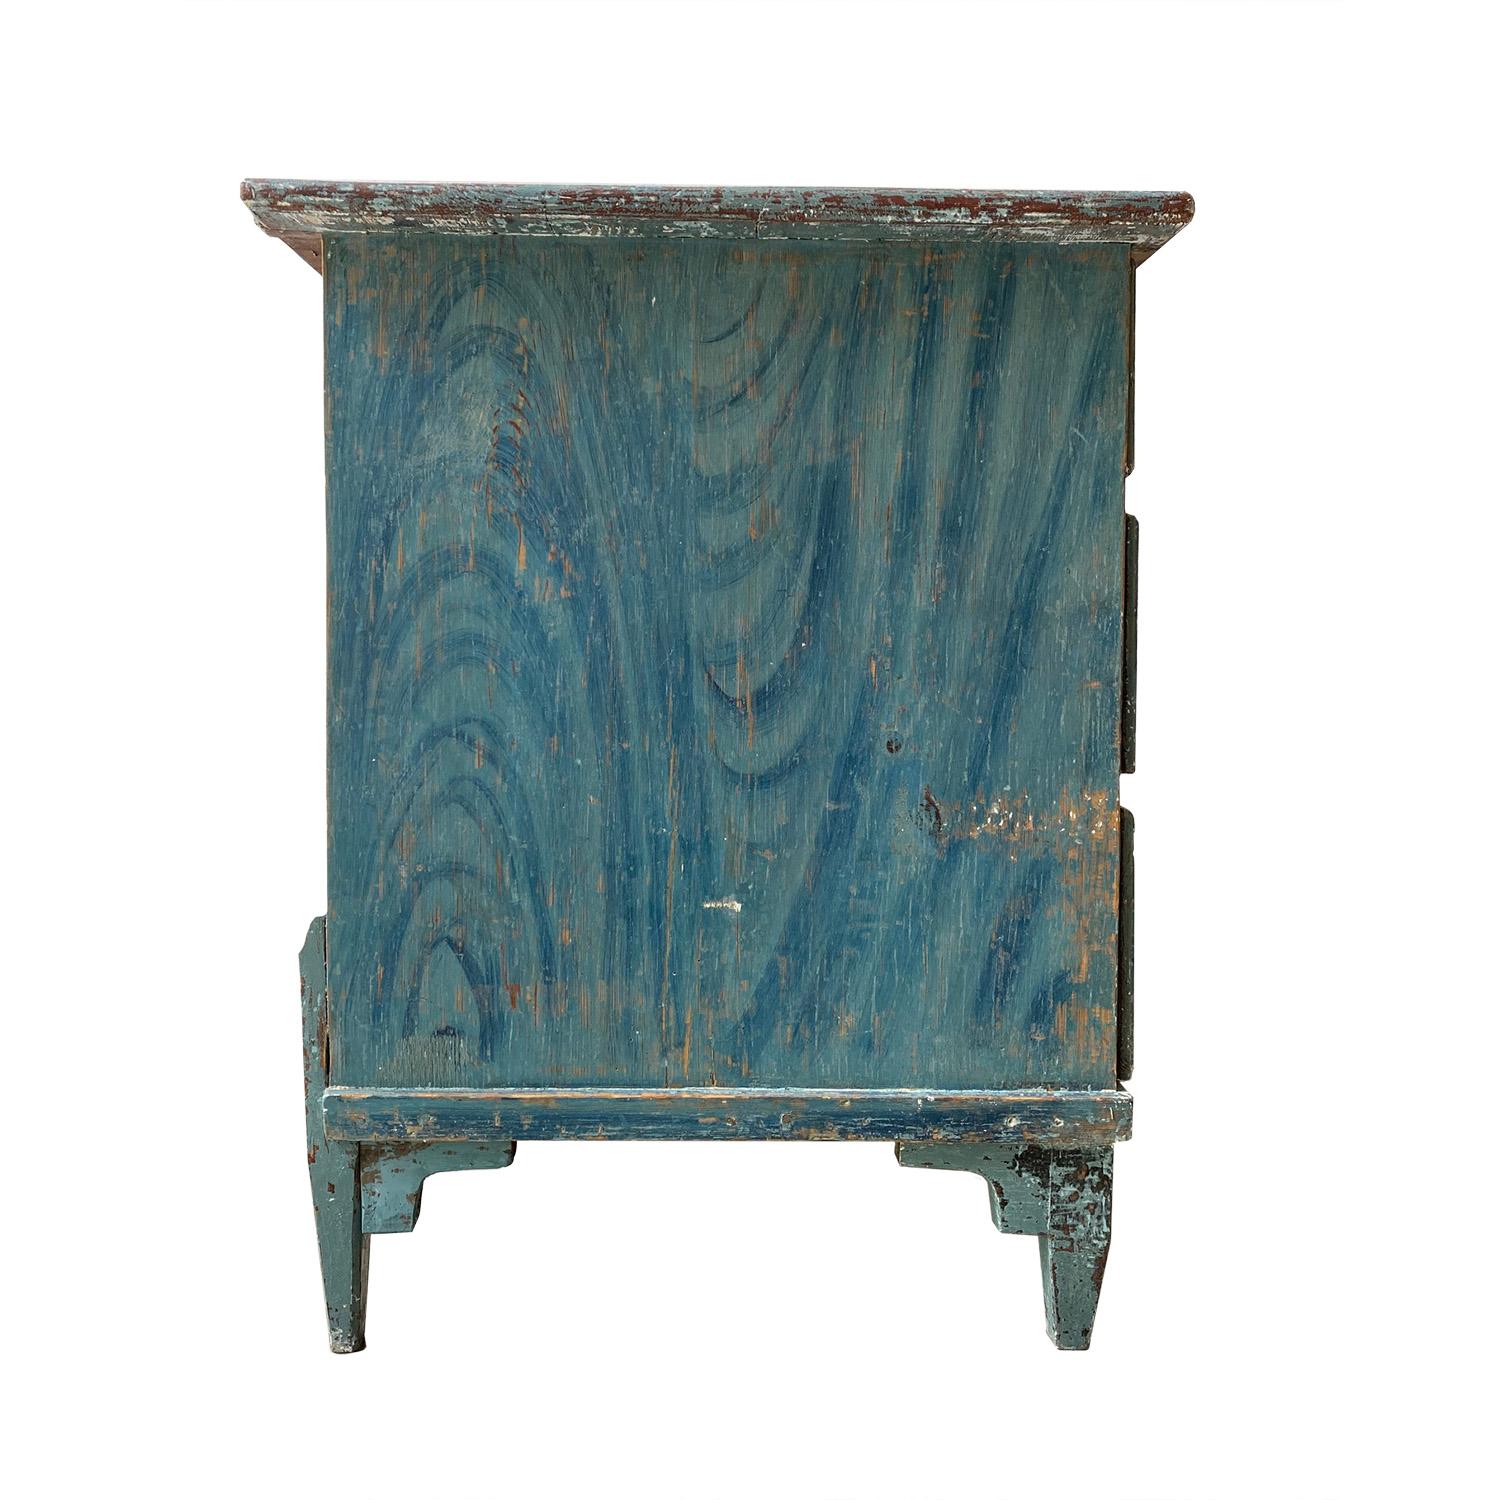 An early three drawer chest from Urshult, Smaland with two shorter drawers, below two longer. The commode was sent to artisan restorers in Sweden and was requested to be kept with as much original paint as possible. It was painstaking dry scraped to